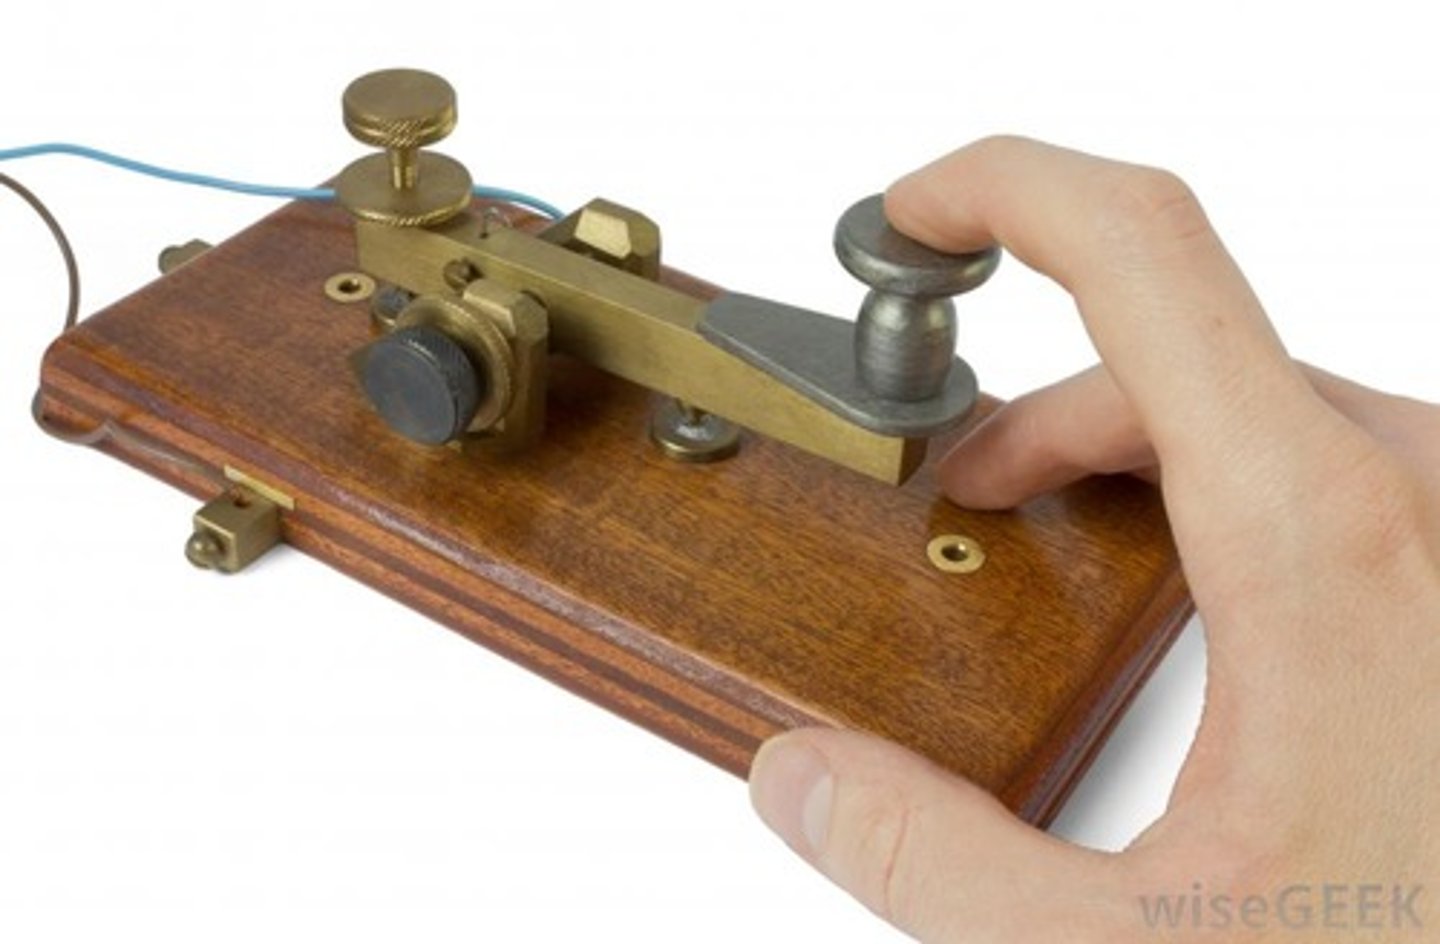 <p>A device for rapid, long-distance transmission of information over an electric wire. It was introduced in England and North America in the 1830s and 1840s.</p>